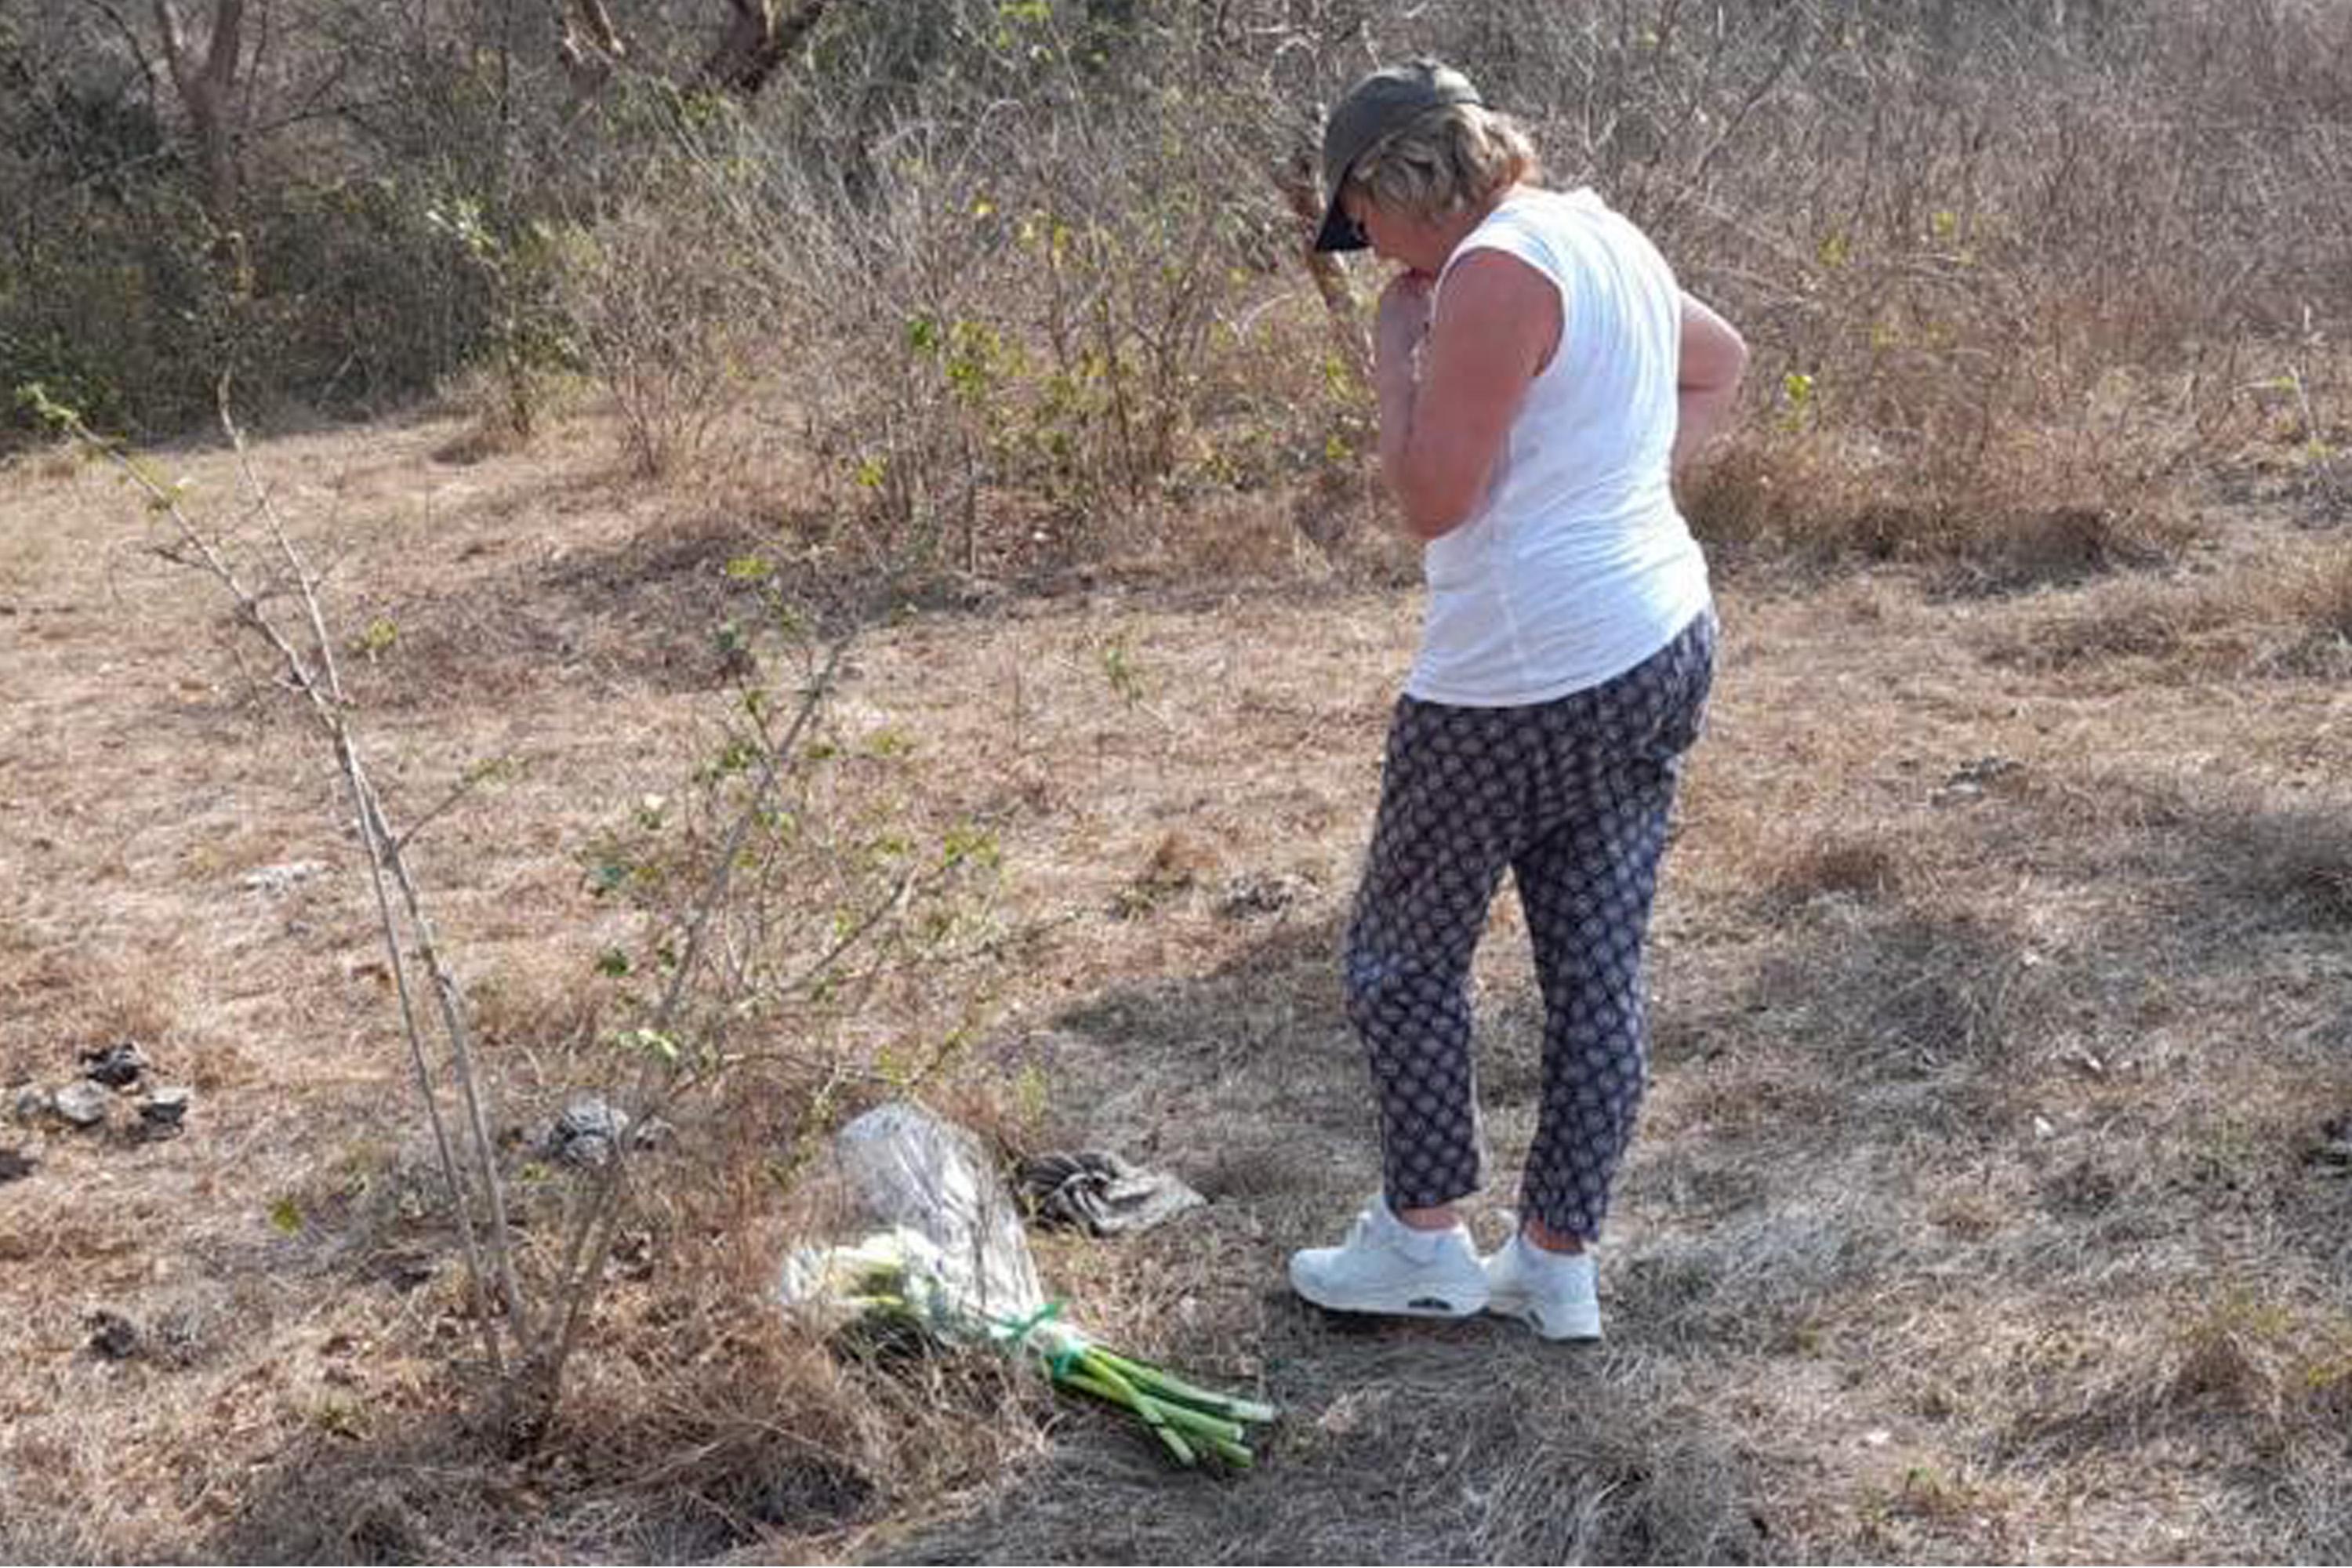 Sonja Ter Laag, sister of murdered Honduran journalist Hans Ter Laag, during a visit in March 2022 to the place where he was murdered, in a rural area of ​​Chalatenango.  Photo by El Faro/Courtesy: Sonja Ter Laag